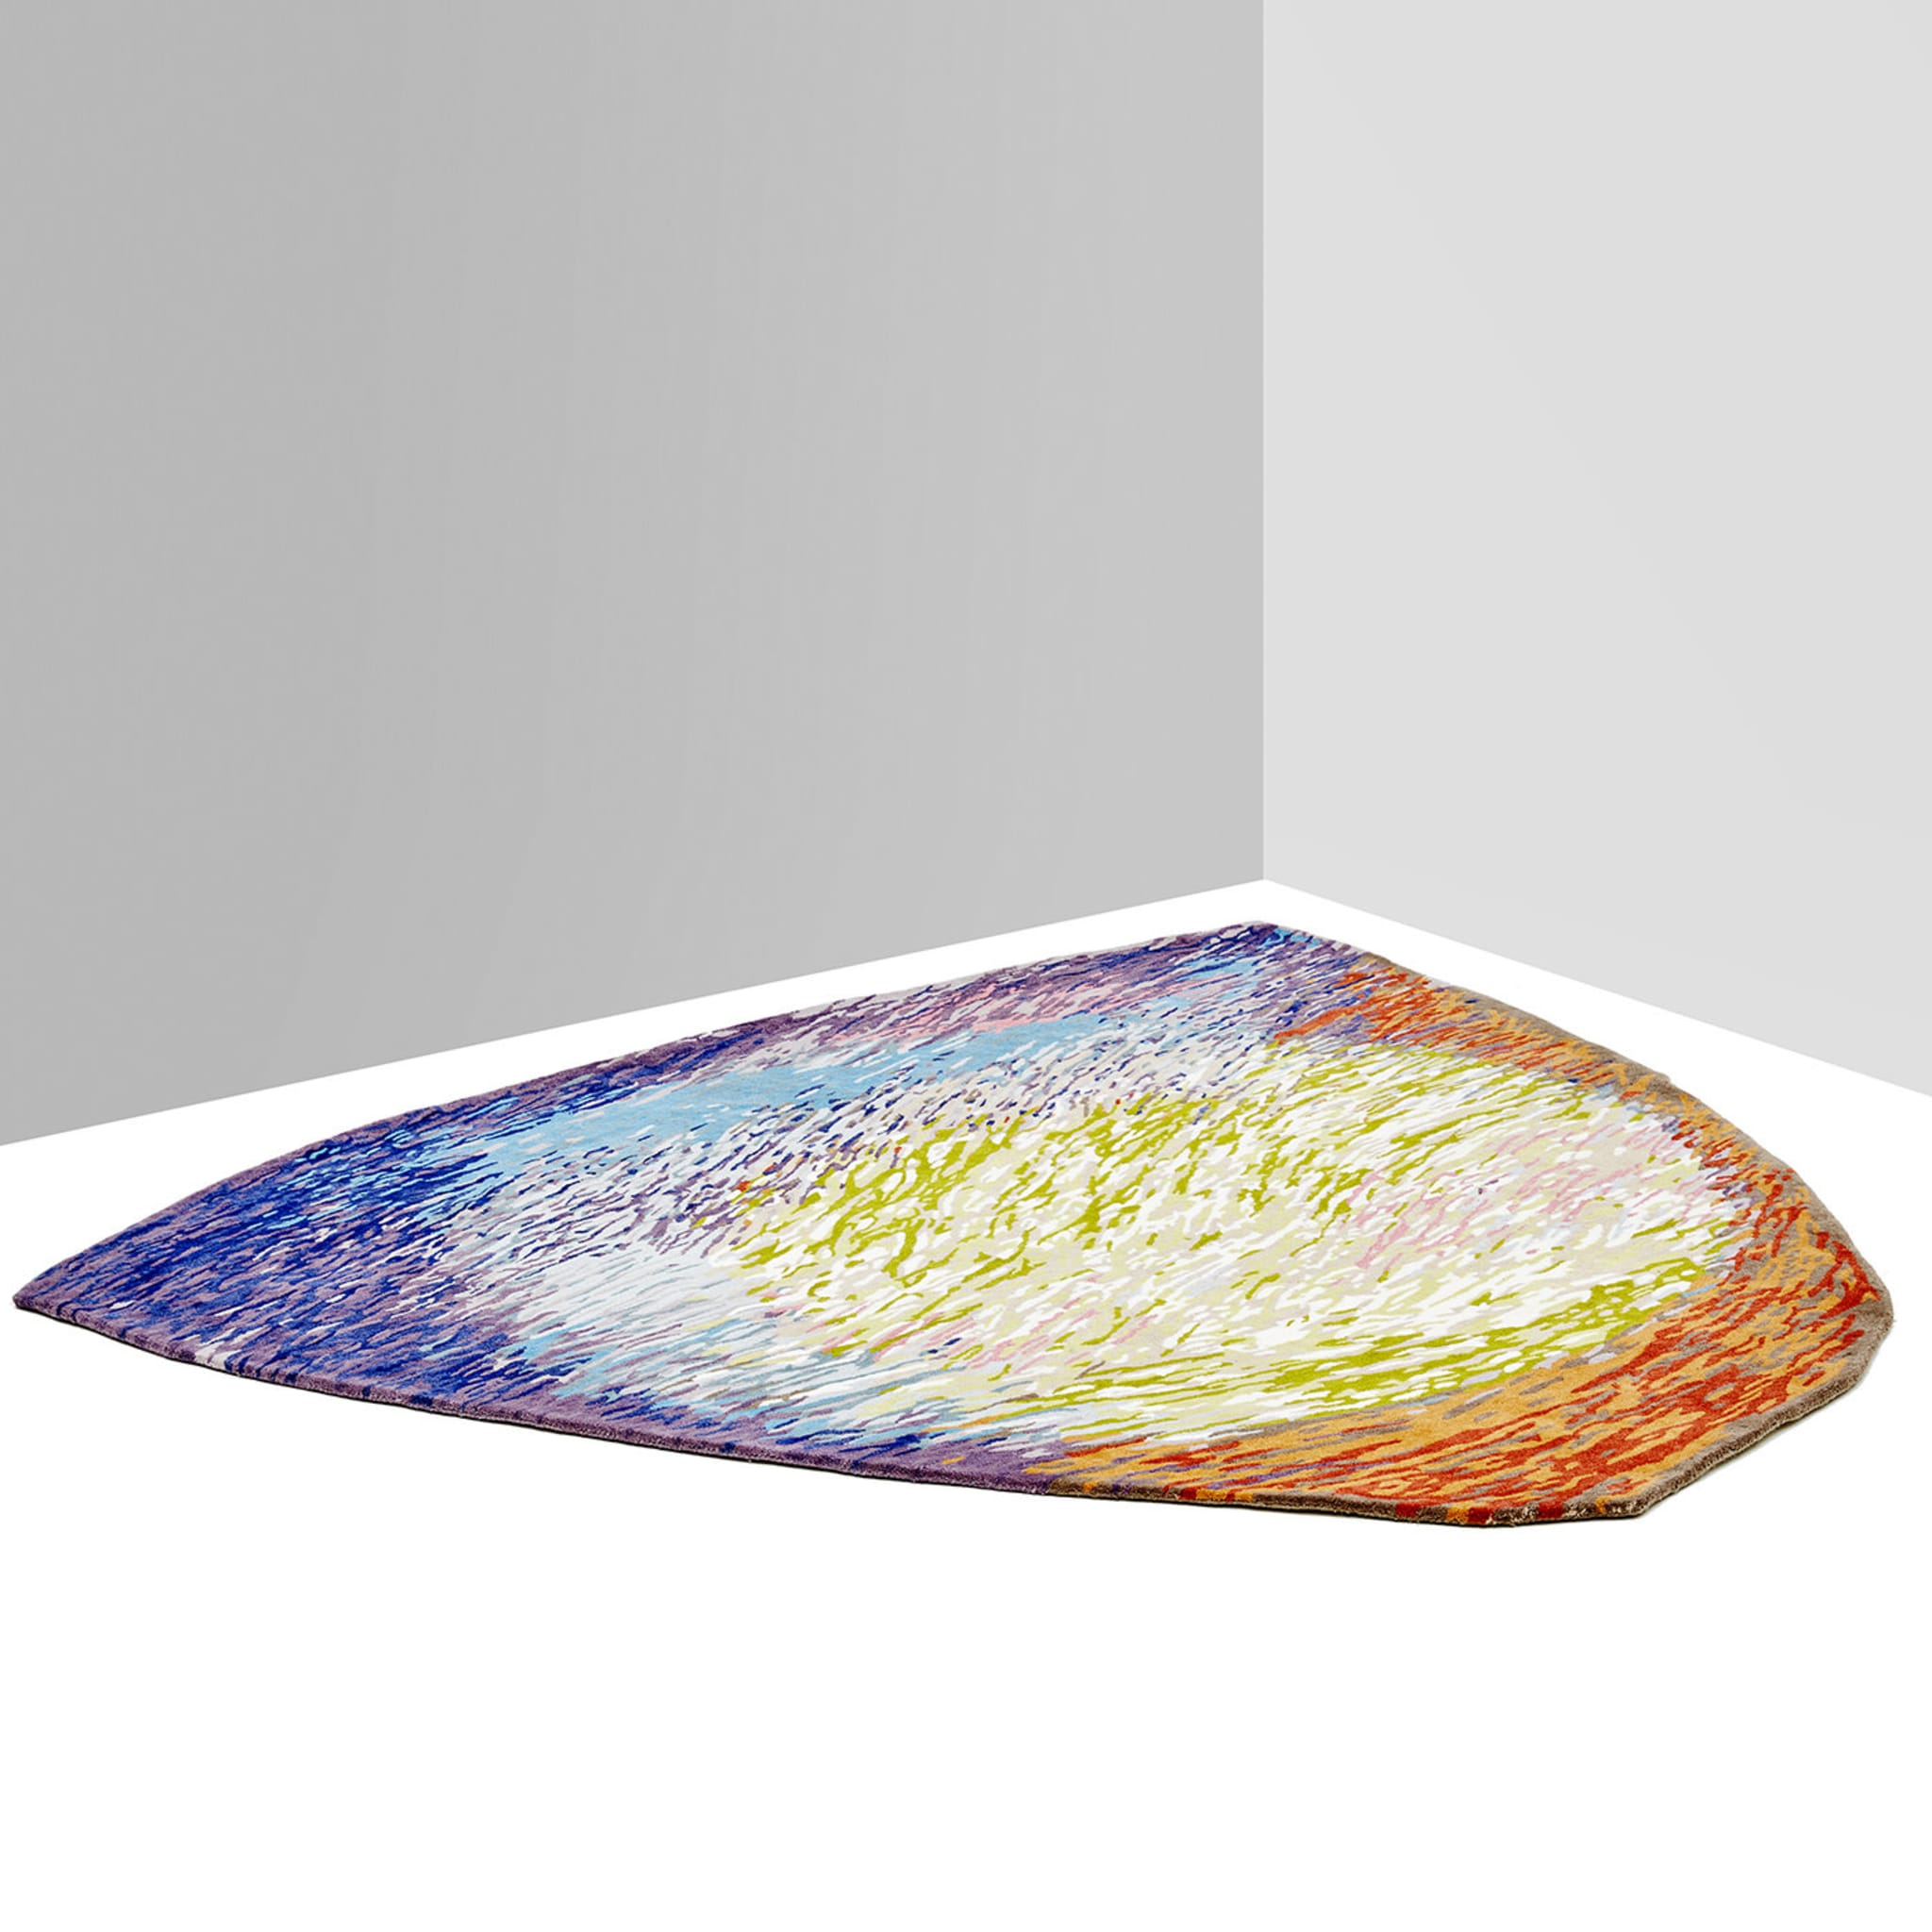 Spectrum Wool Rug by Clémentine Chambon - Limited Edition - Alternative view 1